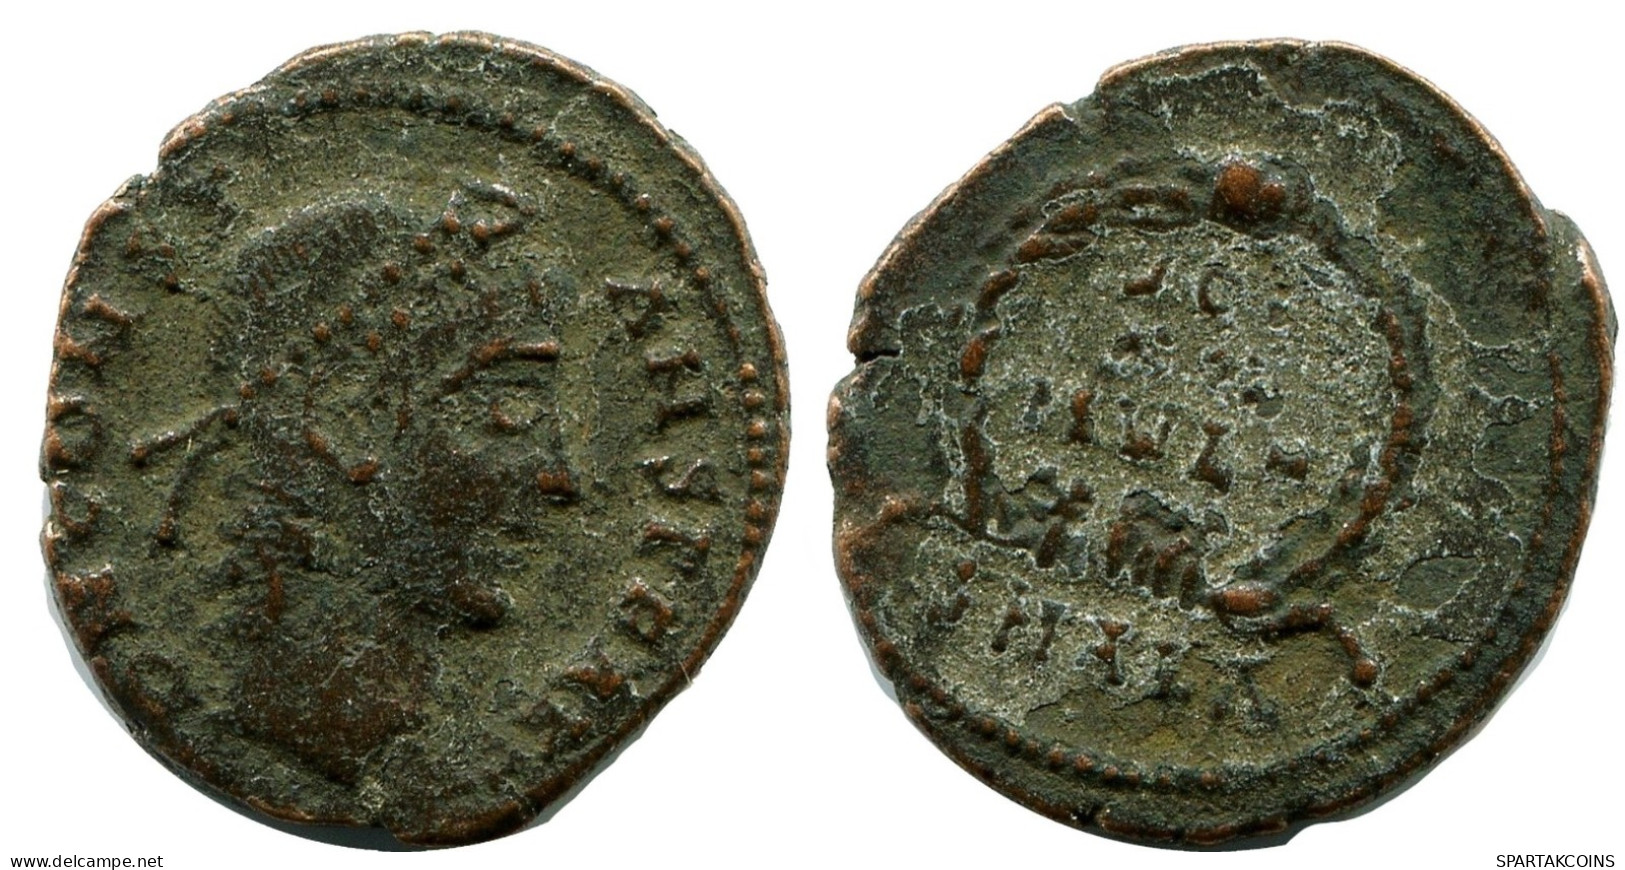 CONSTANS MINTED IN ALEKSANDRIA FOUND IN IHNASYAH HOARD EGYPT #ANC11422.14.E.A - The Christian Empire (307 AD To 363 AD)